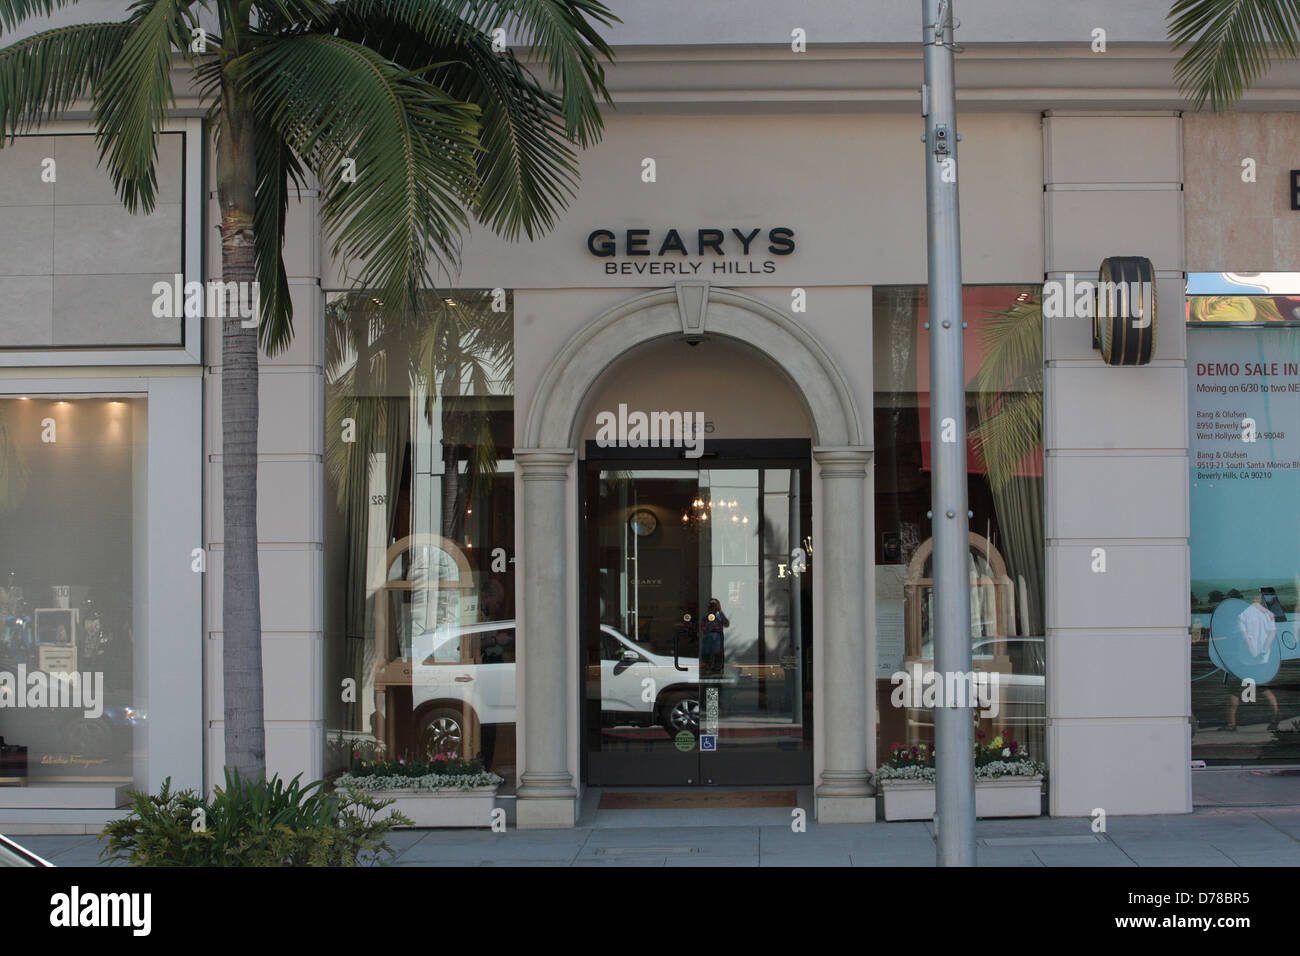 Atmosphere A general view of Gearys Beverly Hills, a luxury home goods ...